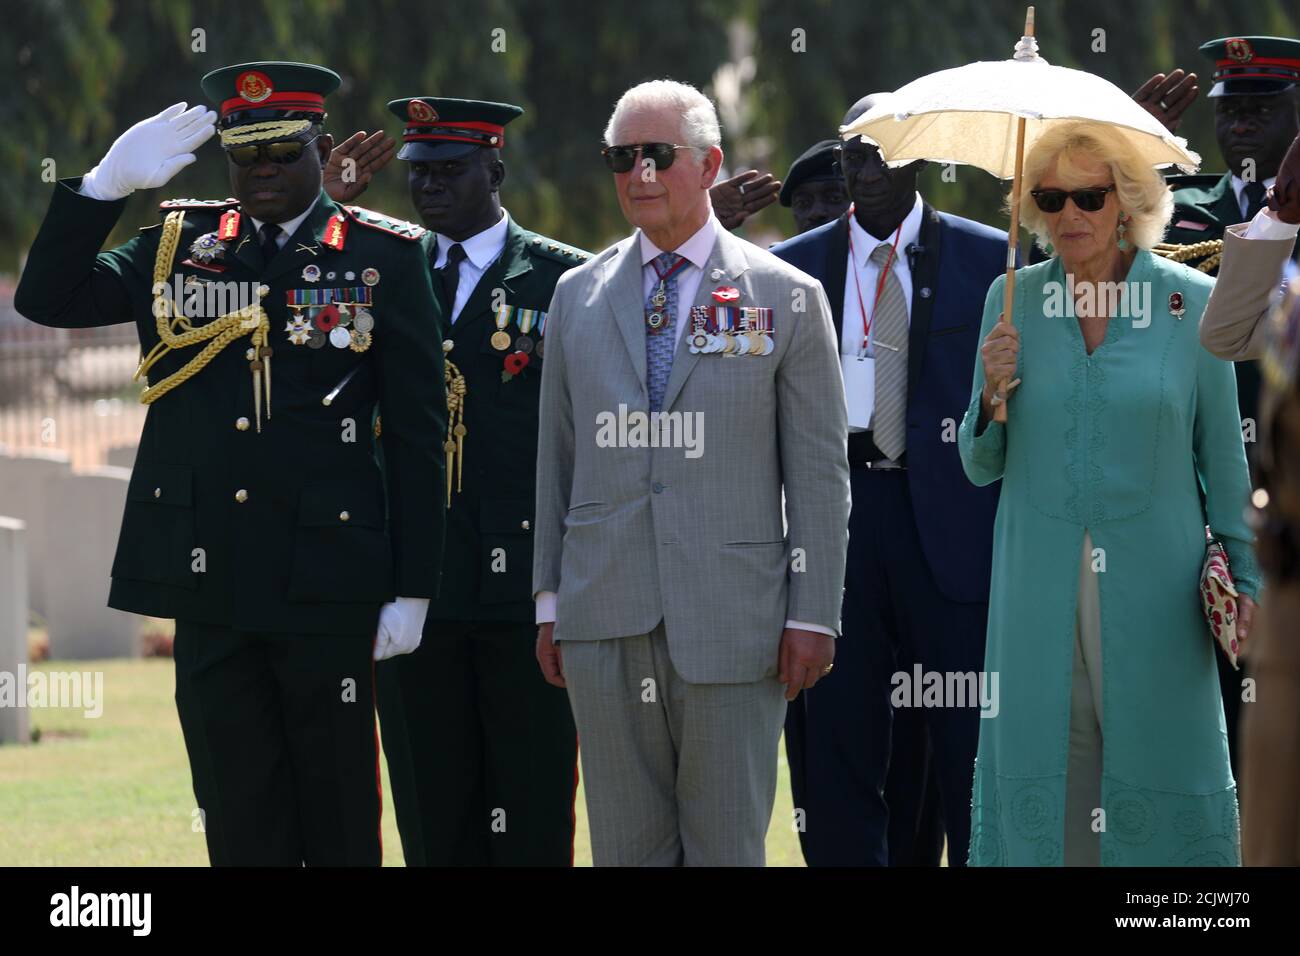 Britain's Prince Charles and Camilla, Duchess of Cornwall, visit the Commonwealth War Graves Cemetery in Fajara, Gambia November 1, 2018. REUTERS/Luc Gnago/Pool Stock Photo